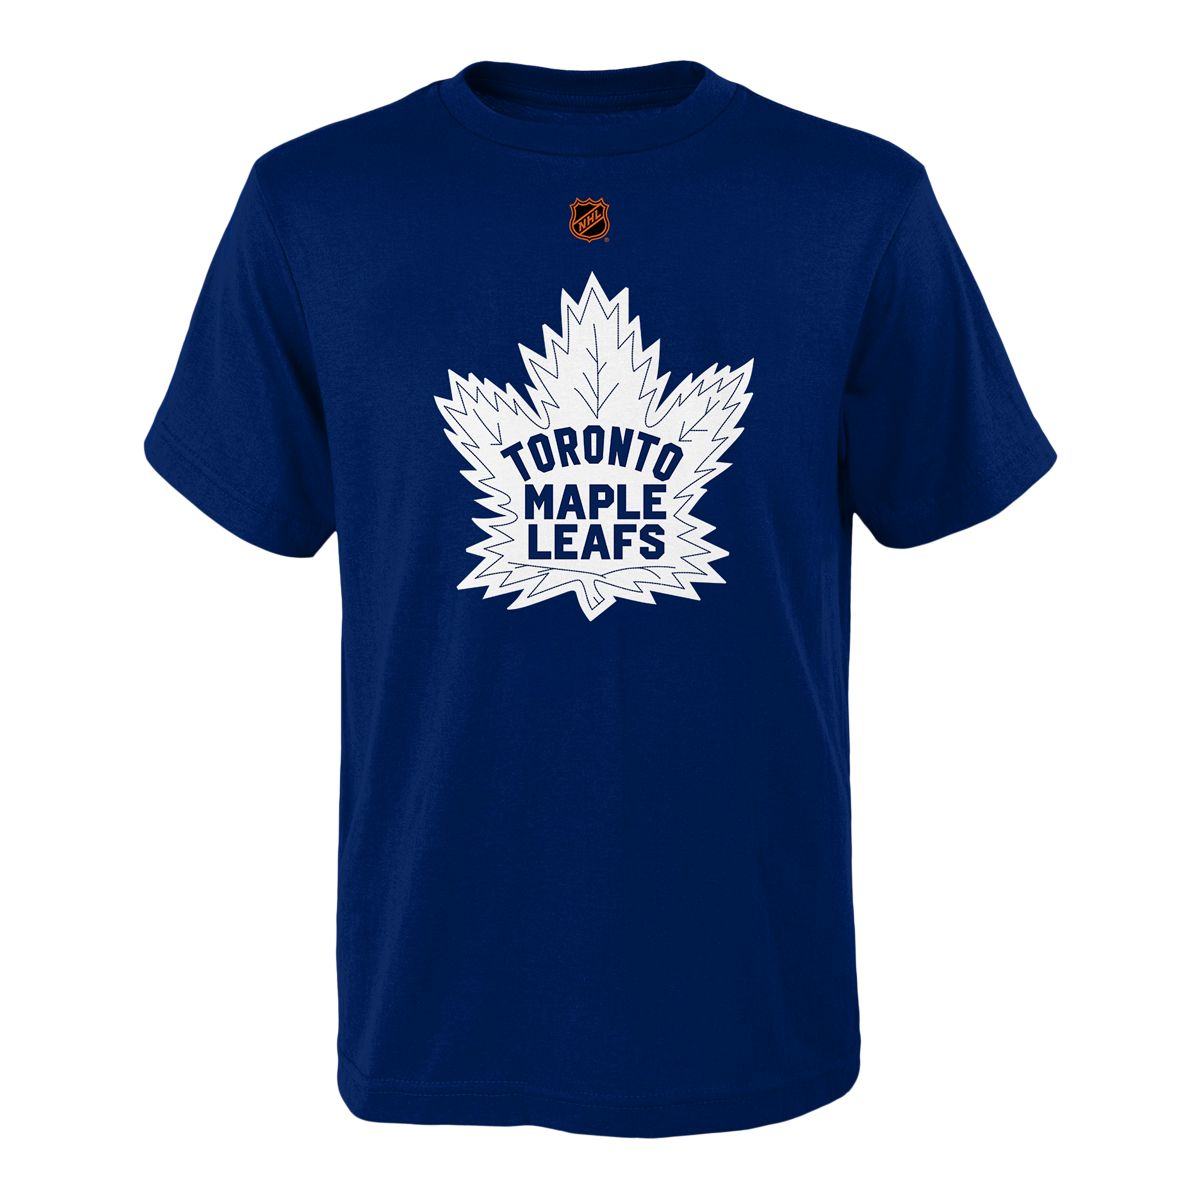 OUTERSTUFF Youth Toronto Maple Leafs Outerstuff Reverse Retro Logo T Shirt